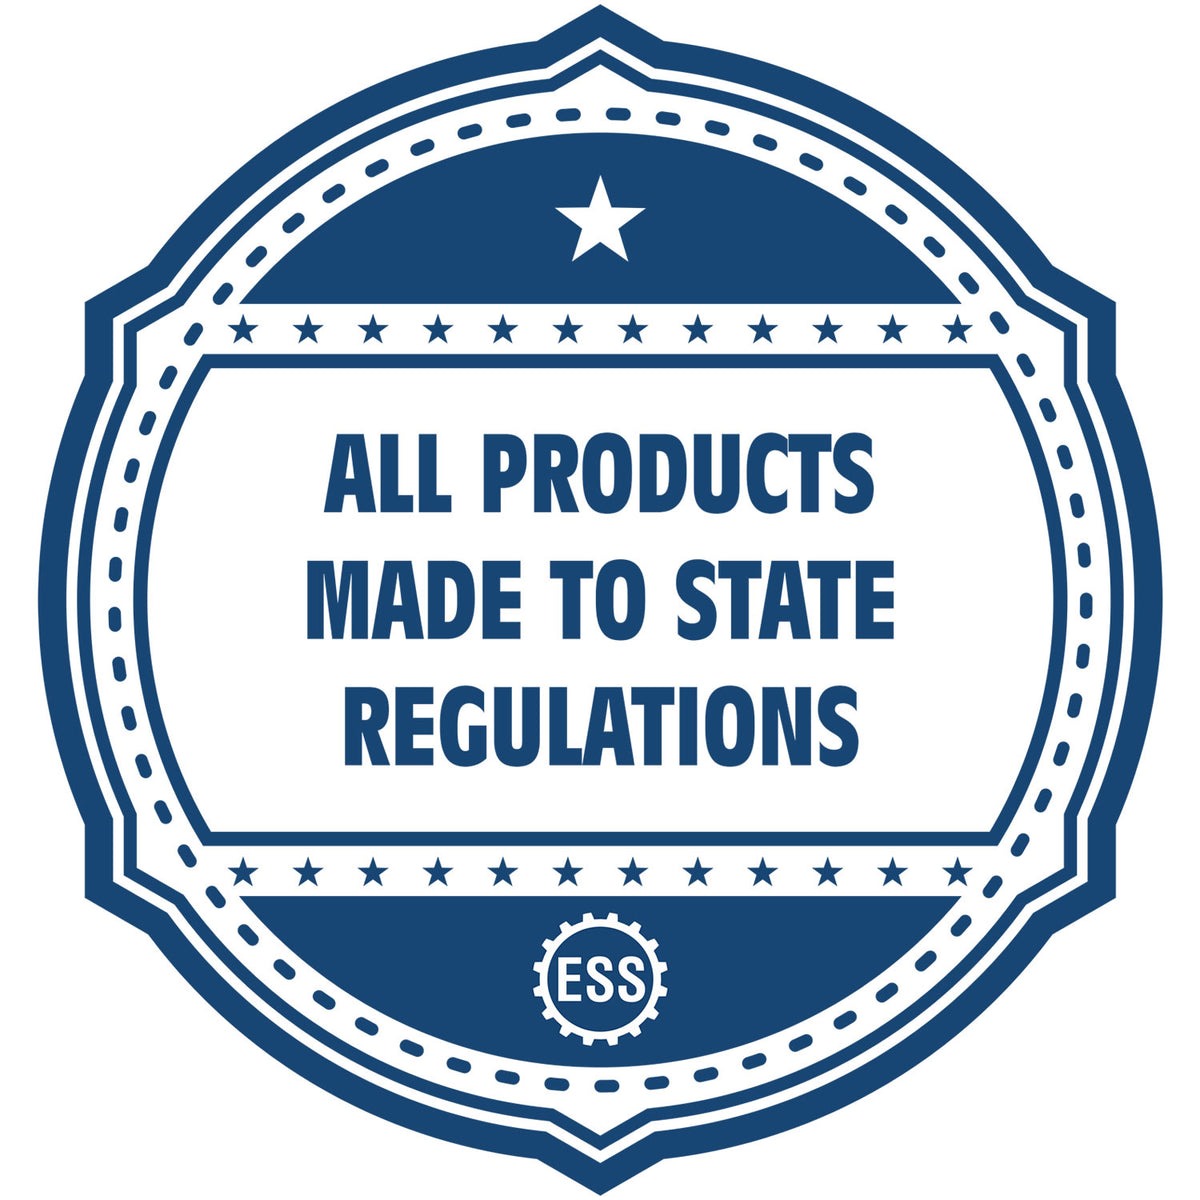 An icon or badge element for the Soft Pennsylvania Professional Engineer Seal showing that this product is made in compliance with state regulations.